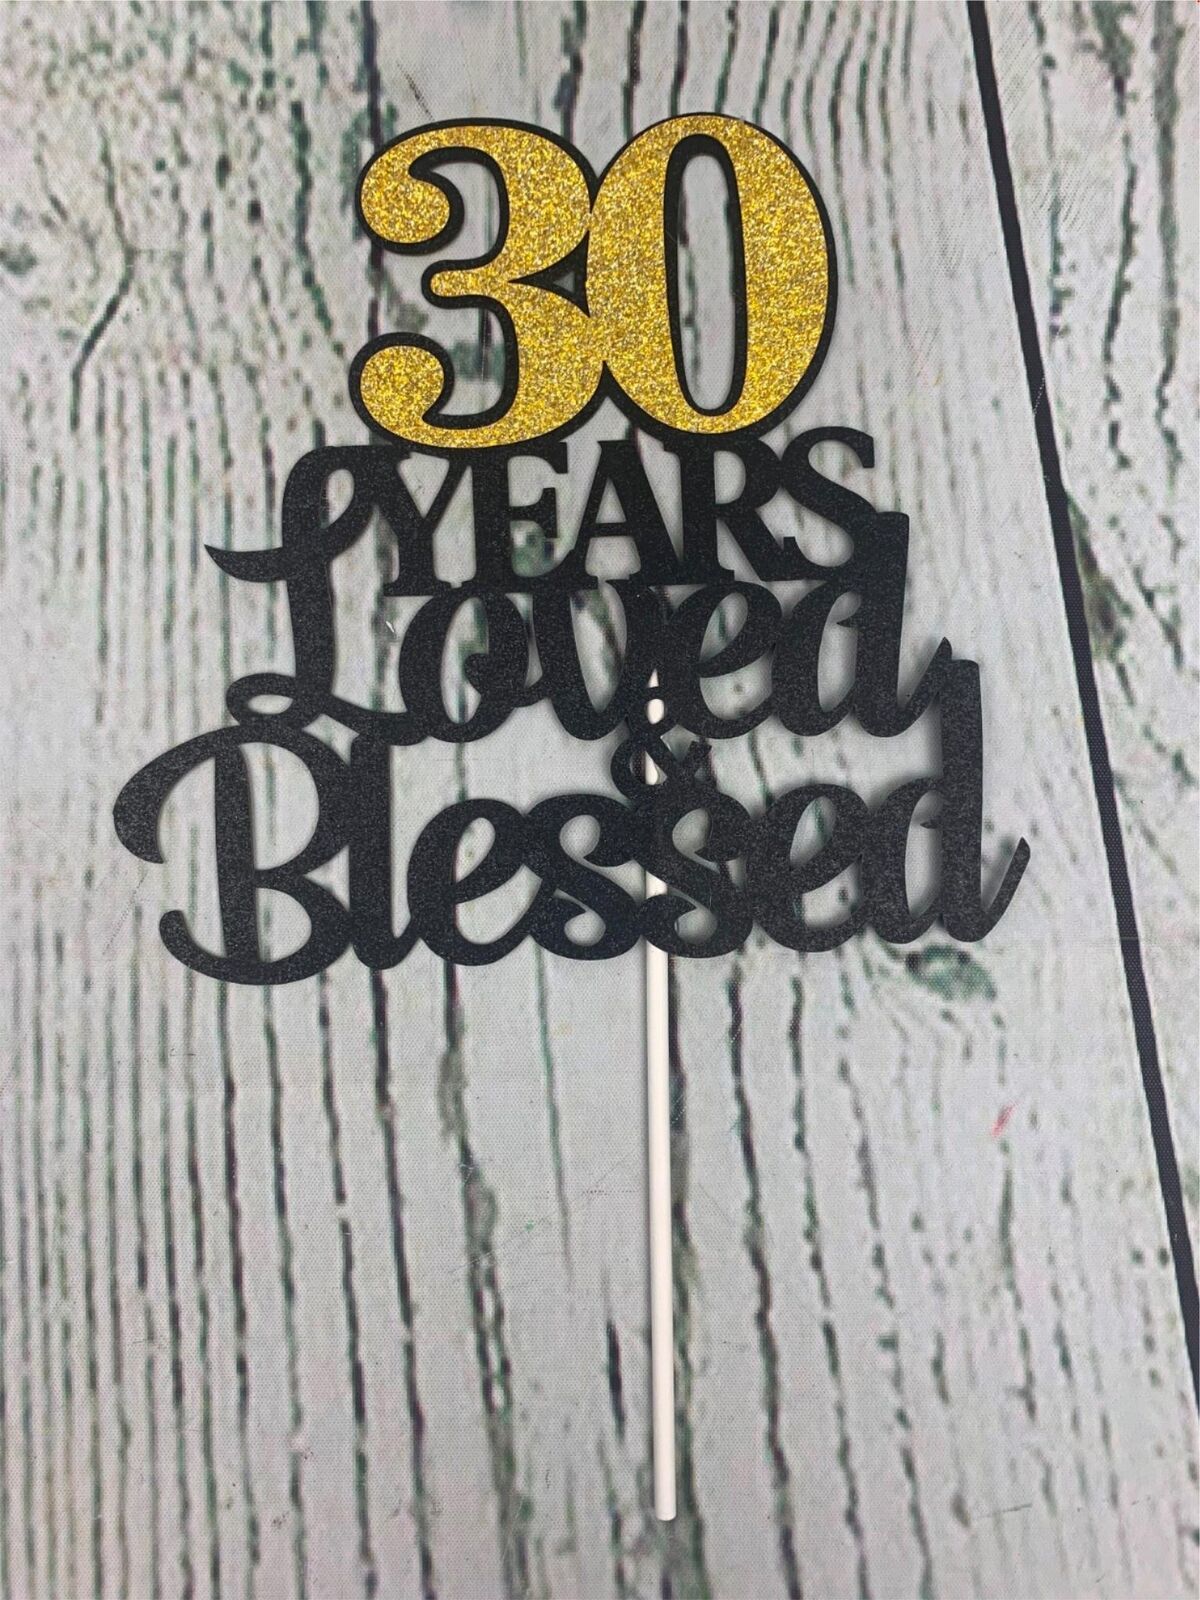 Gold Glitter 30 Years Blessed Loved Cake topper 30th Birthday Anniversary - $16.14